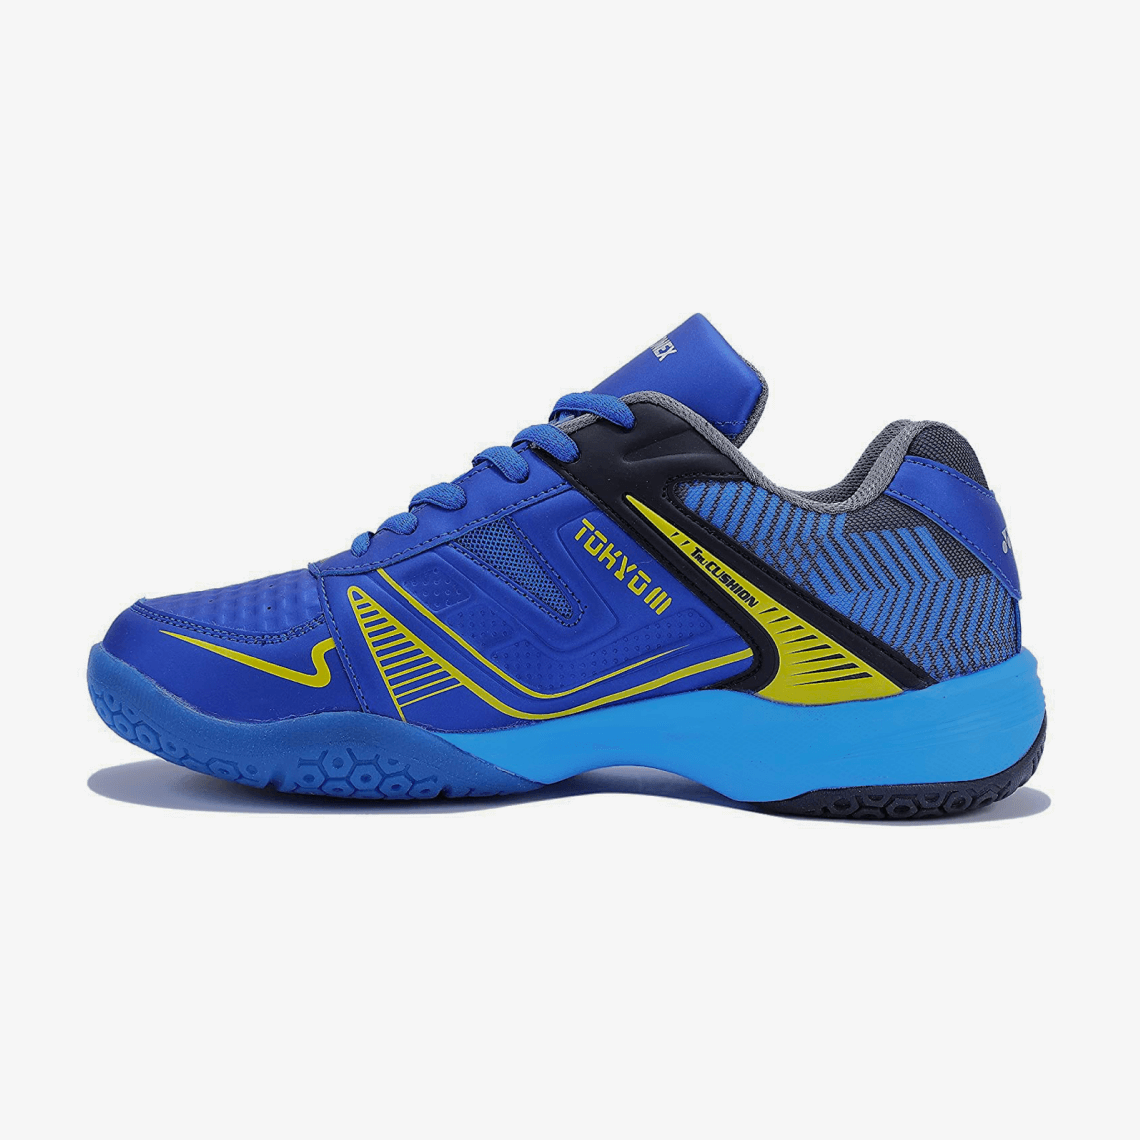 Yonex Akayu Super 5 Badminton Shoes (Red/Gold) – Sports Wing | Shop on